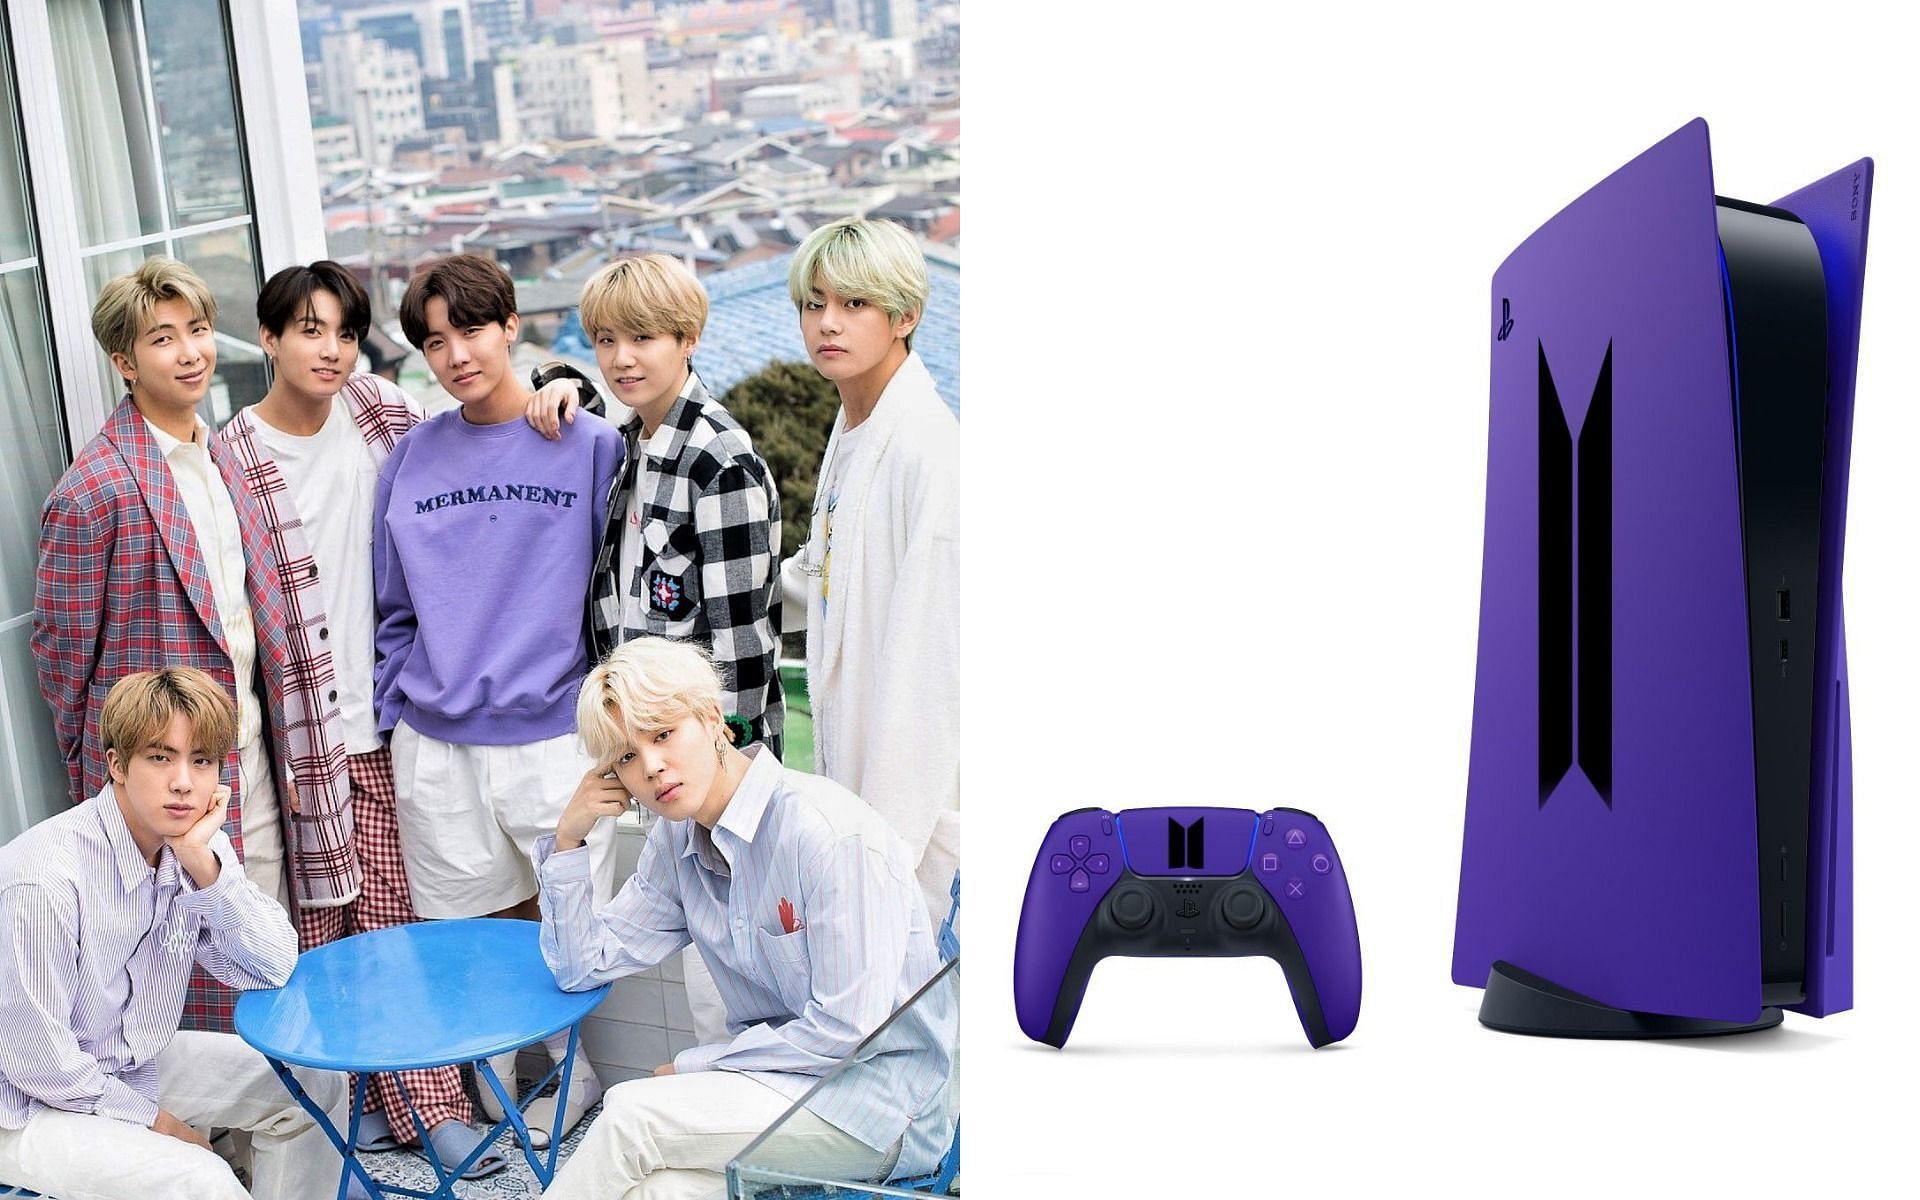 Fans express interest in a BTS X PS5 edition console cover (Image via Big Hit Music, Concept Art via Twitter/@Poli_Pol1)